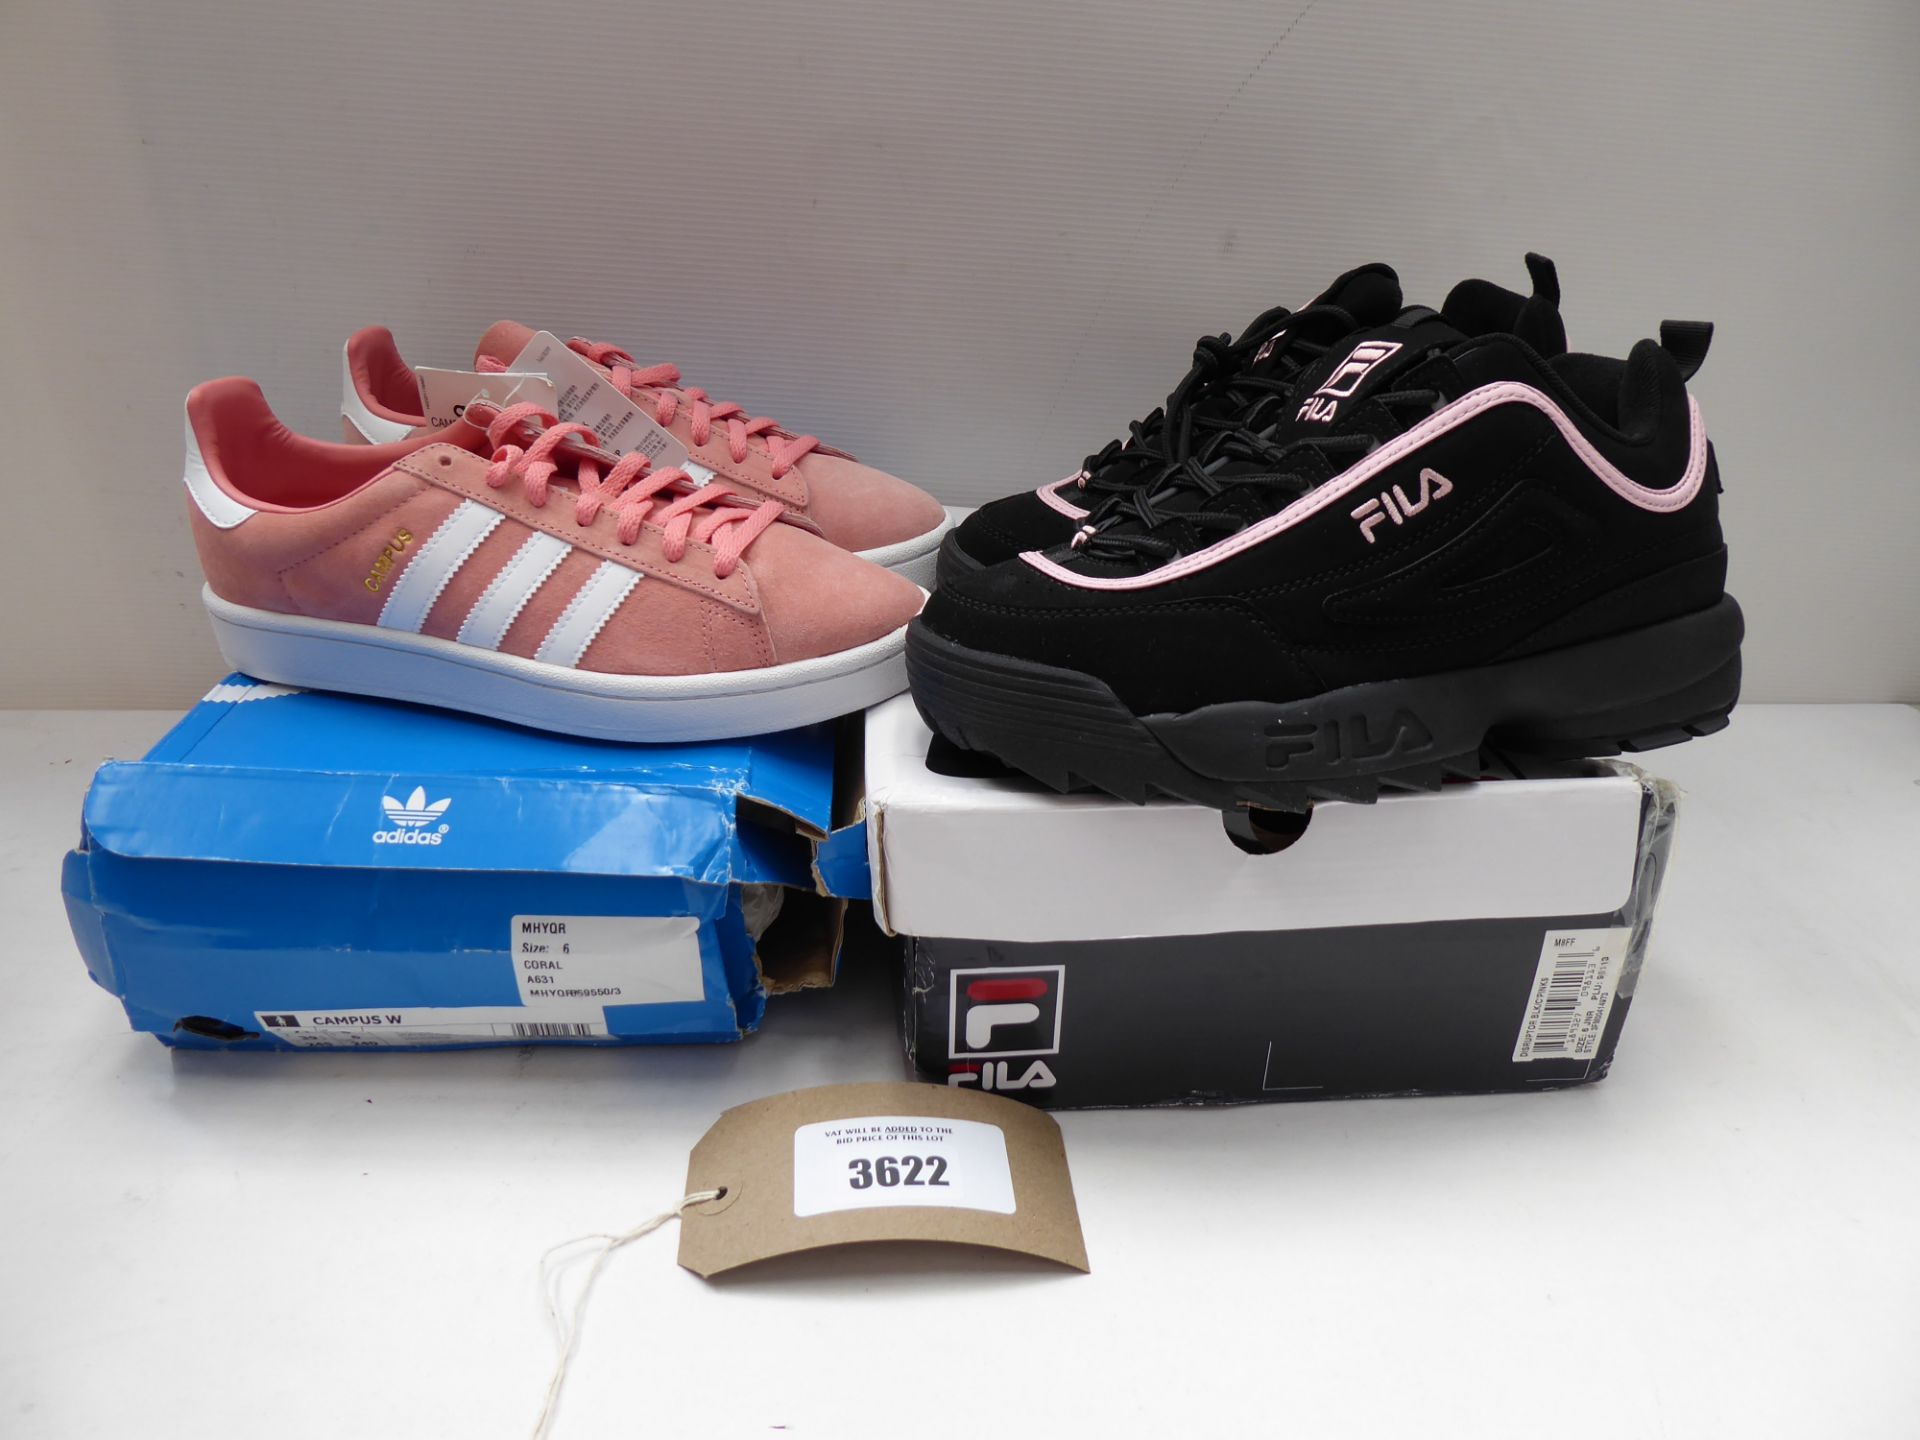 Adidas Campus Pink Shoes Size 6 and Fila Distrupor Black Trainers Size 6